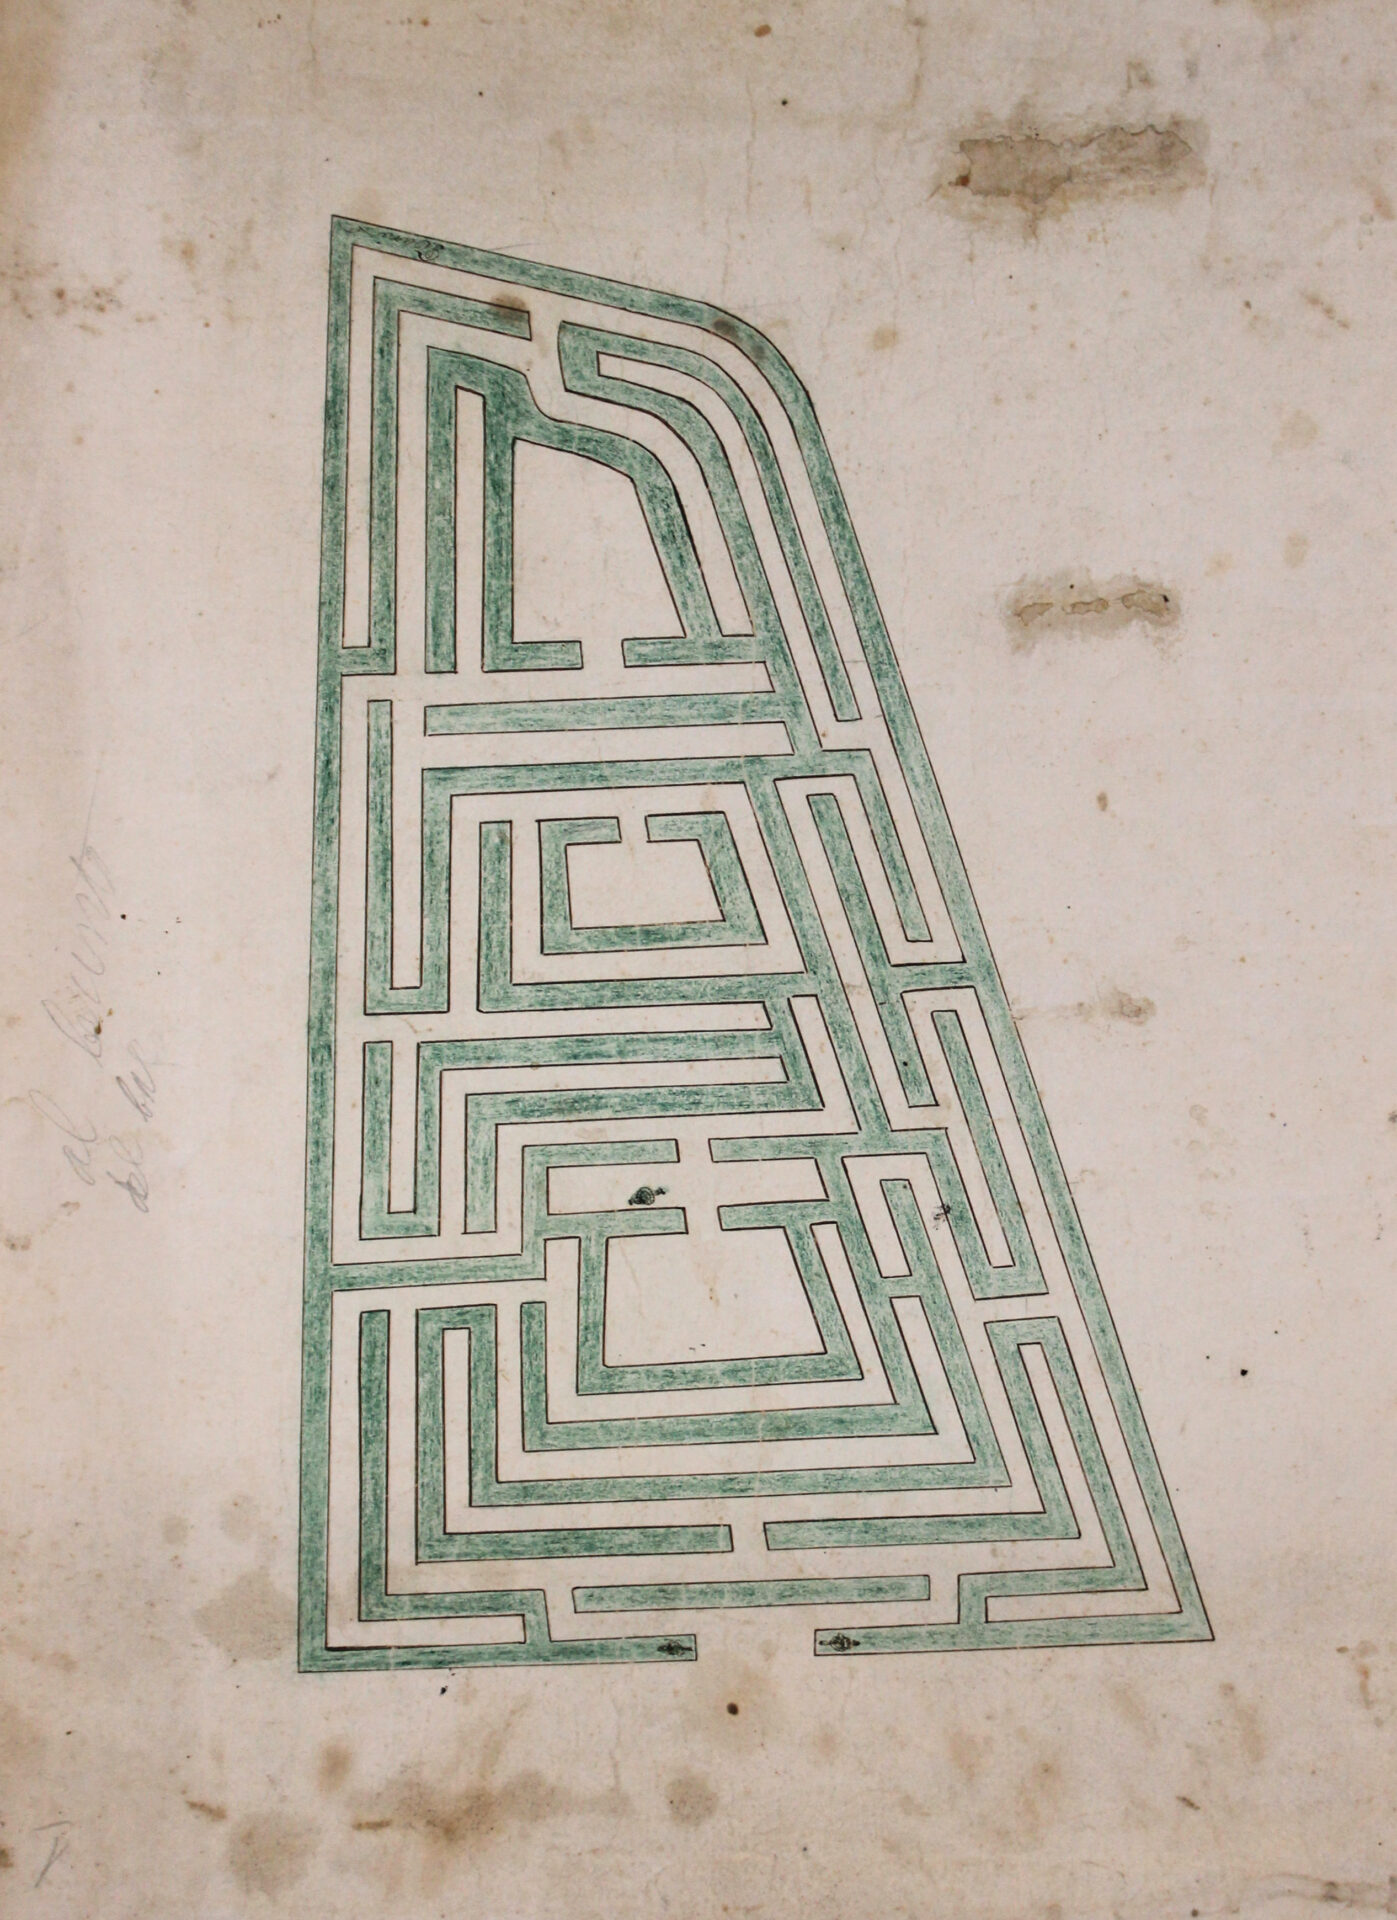 The drawing of the labyrinth in an 18th century paper